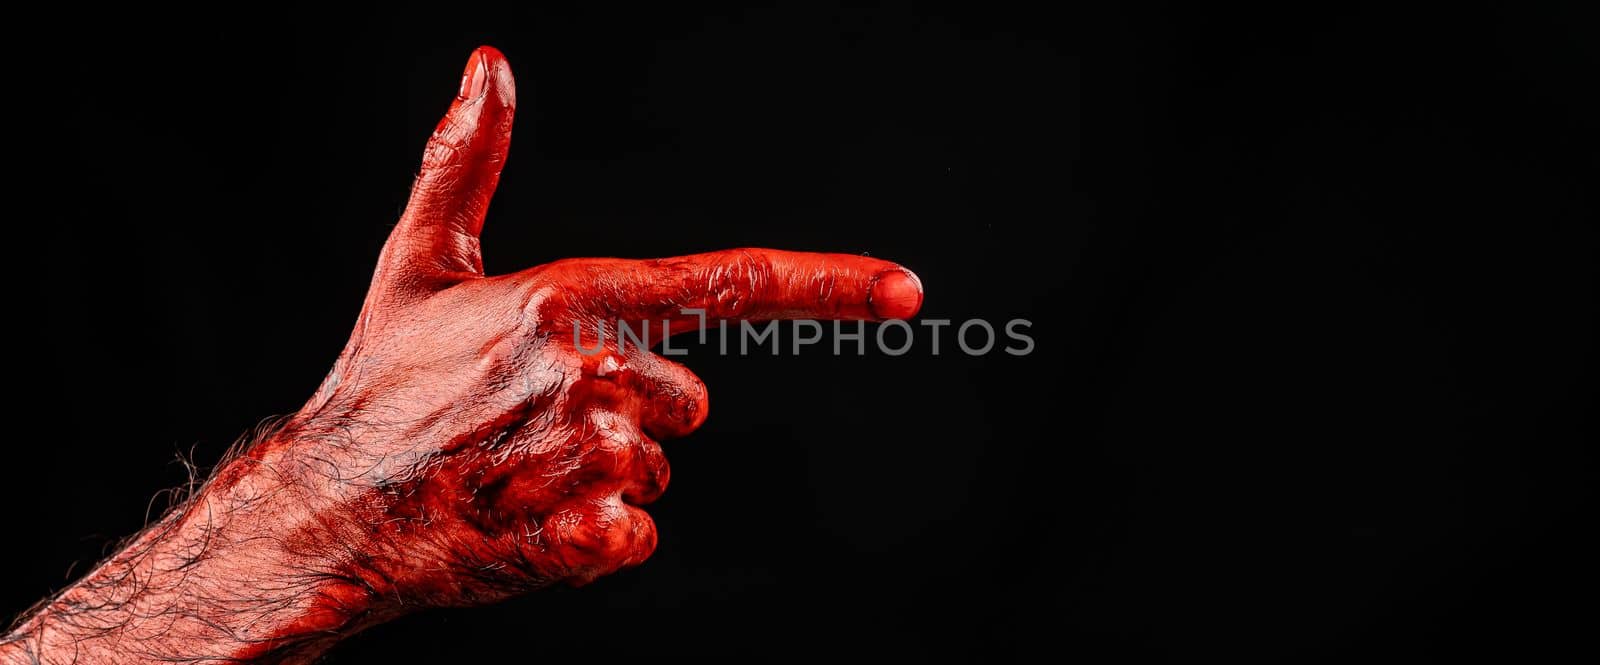 Bloody male hand gesturing shows a gun against black background. by mrwed54